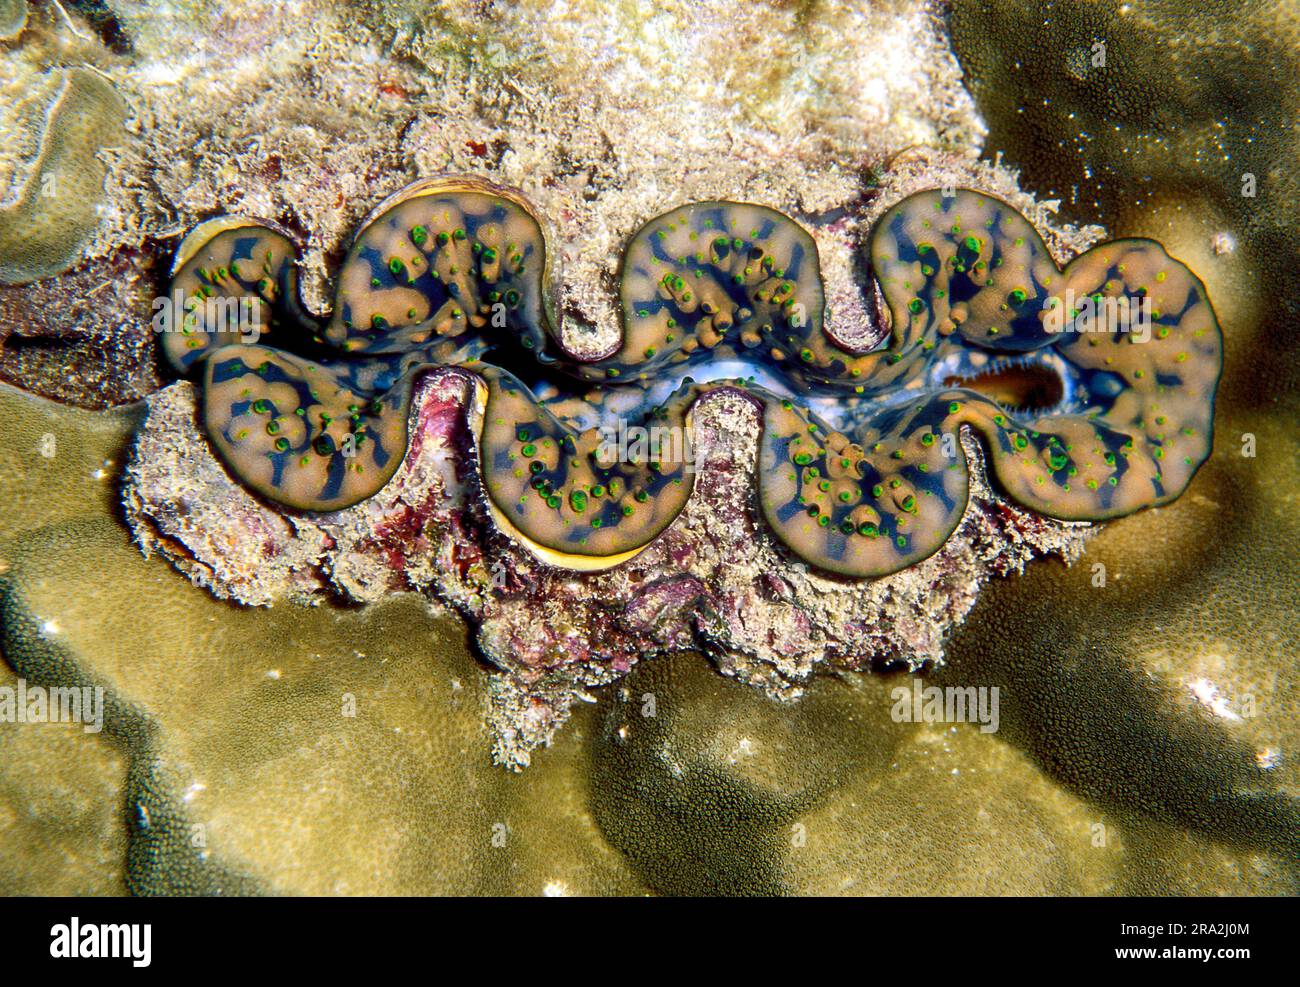 Giant Clam (Tridacna maxima) from southern Thailand. Stock Photo